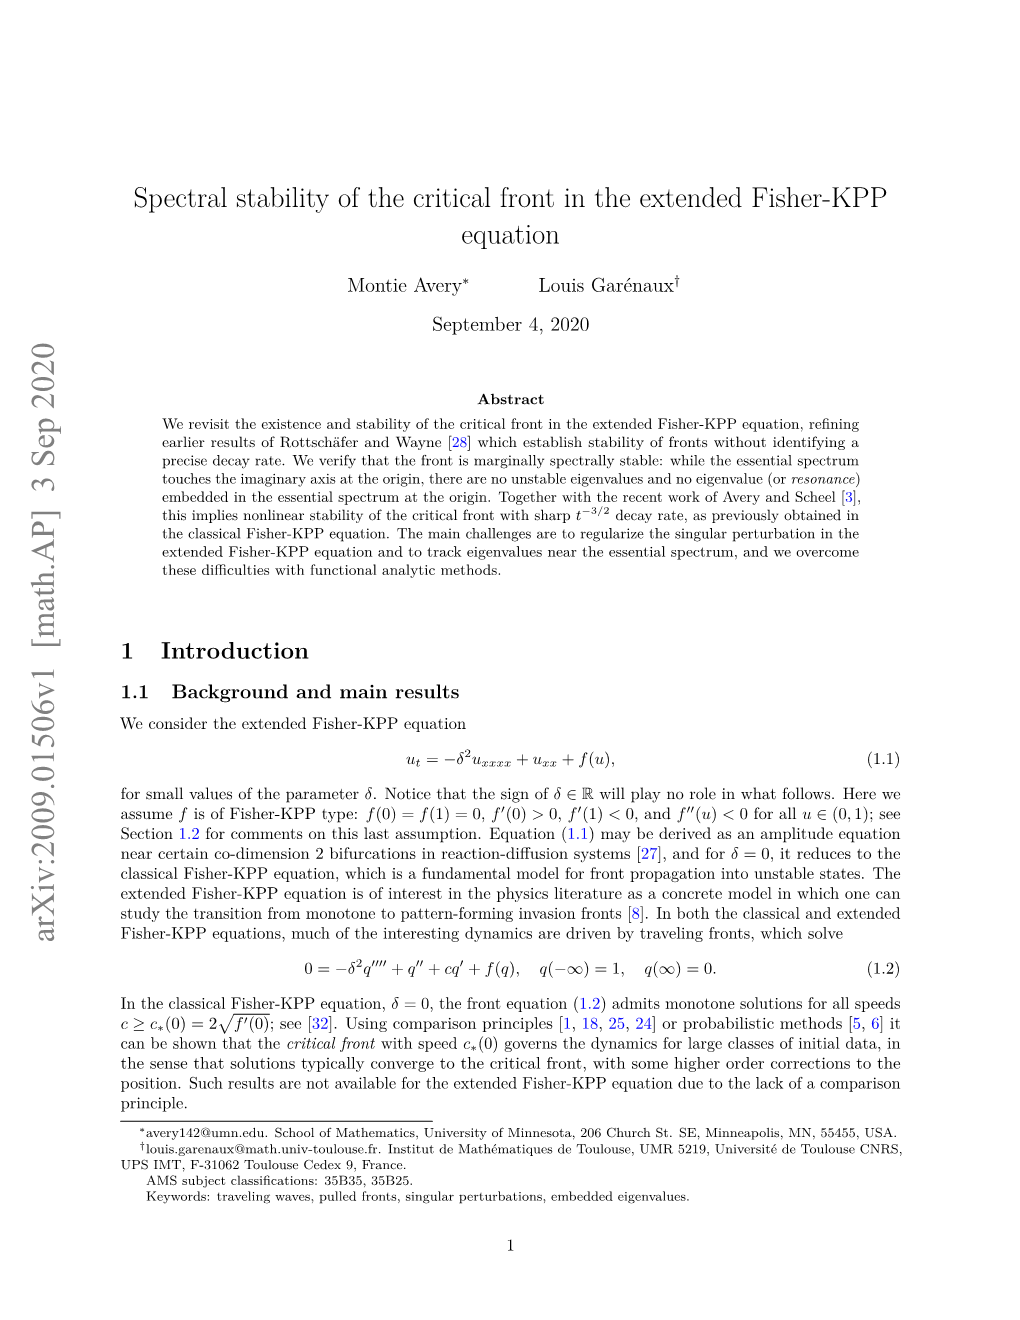 Spectral Stability of the Critical Front in the Extended Fisher-KPP Equation